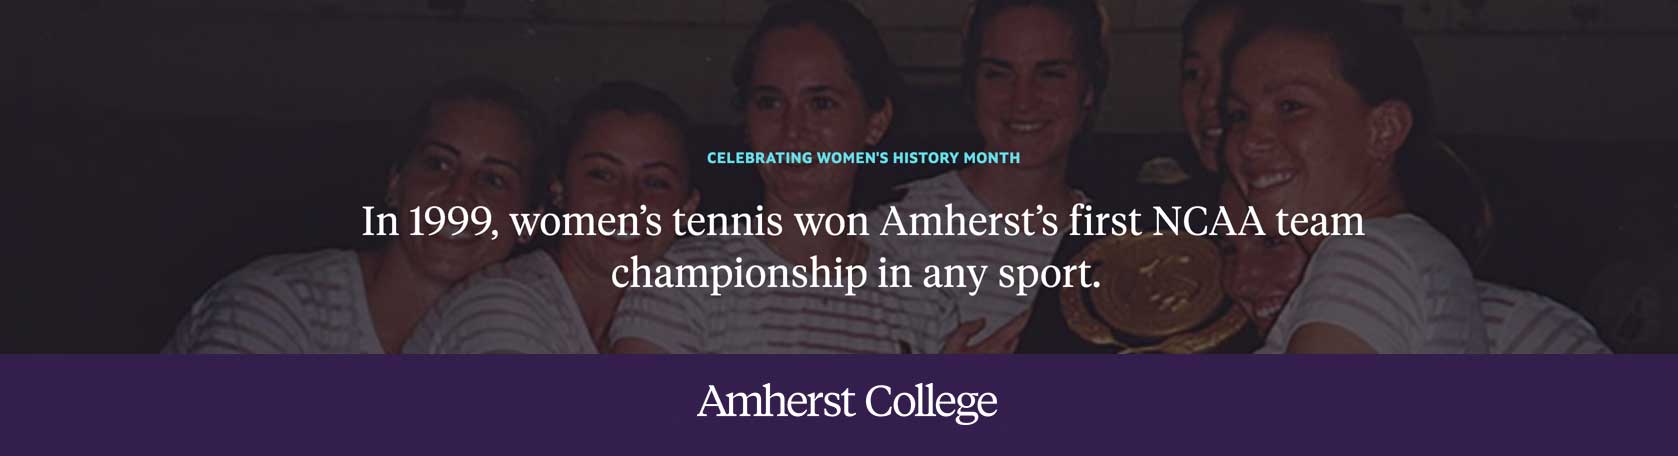 In 1999, women's tennis won Amherst's first NCAA team championship in any sport